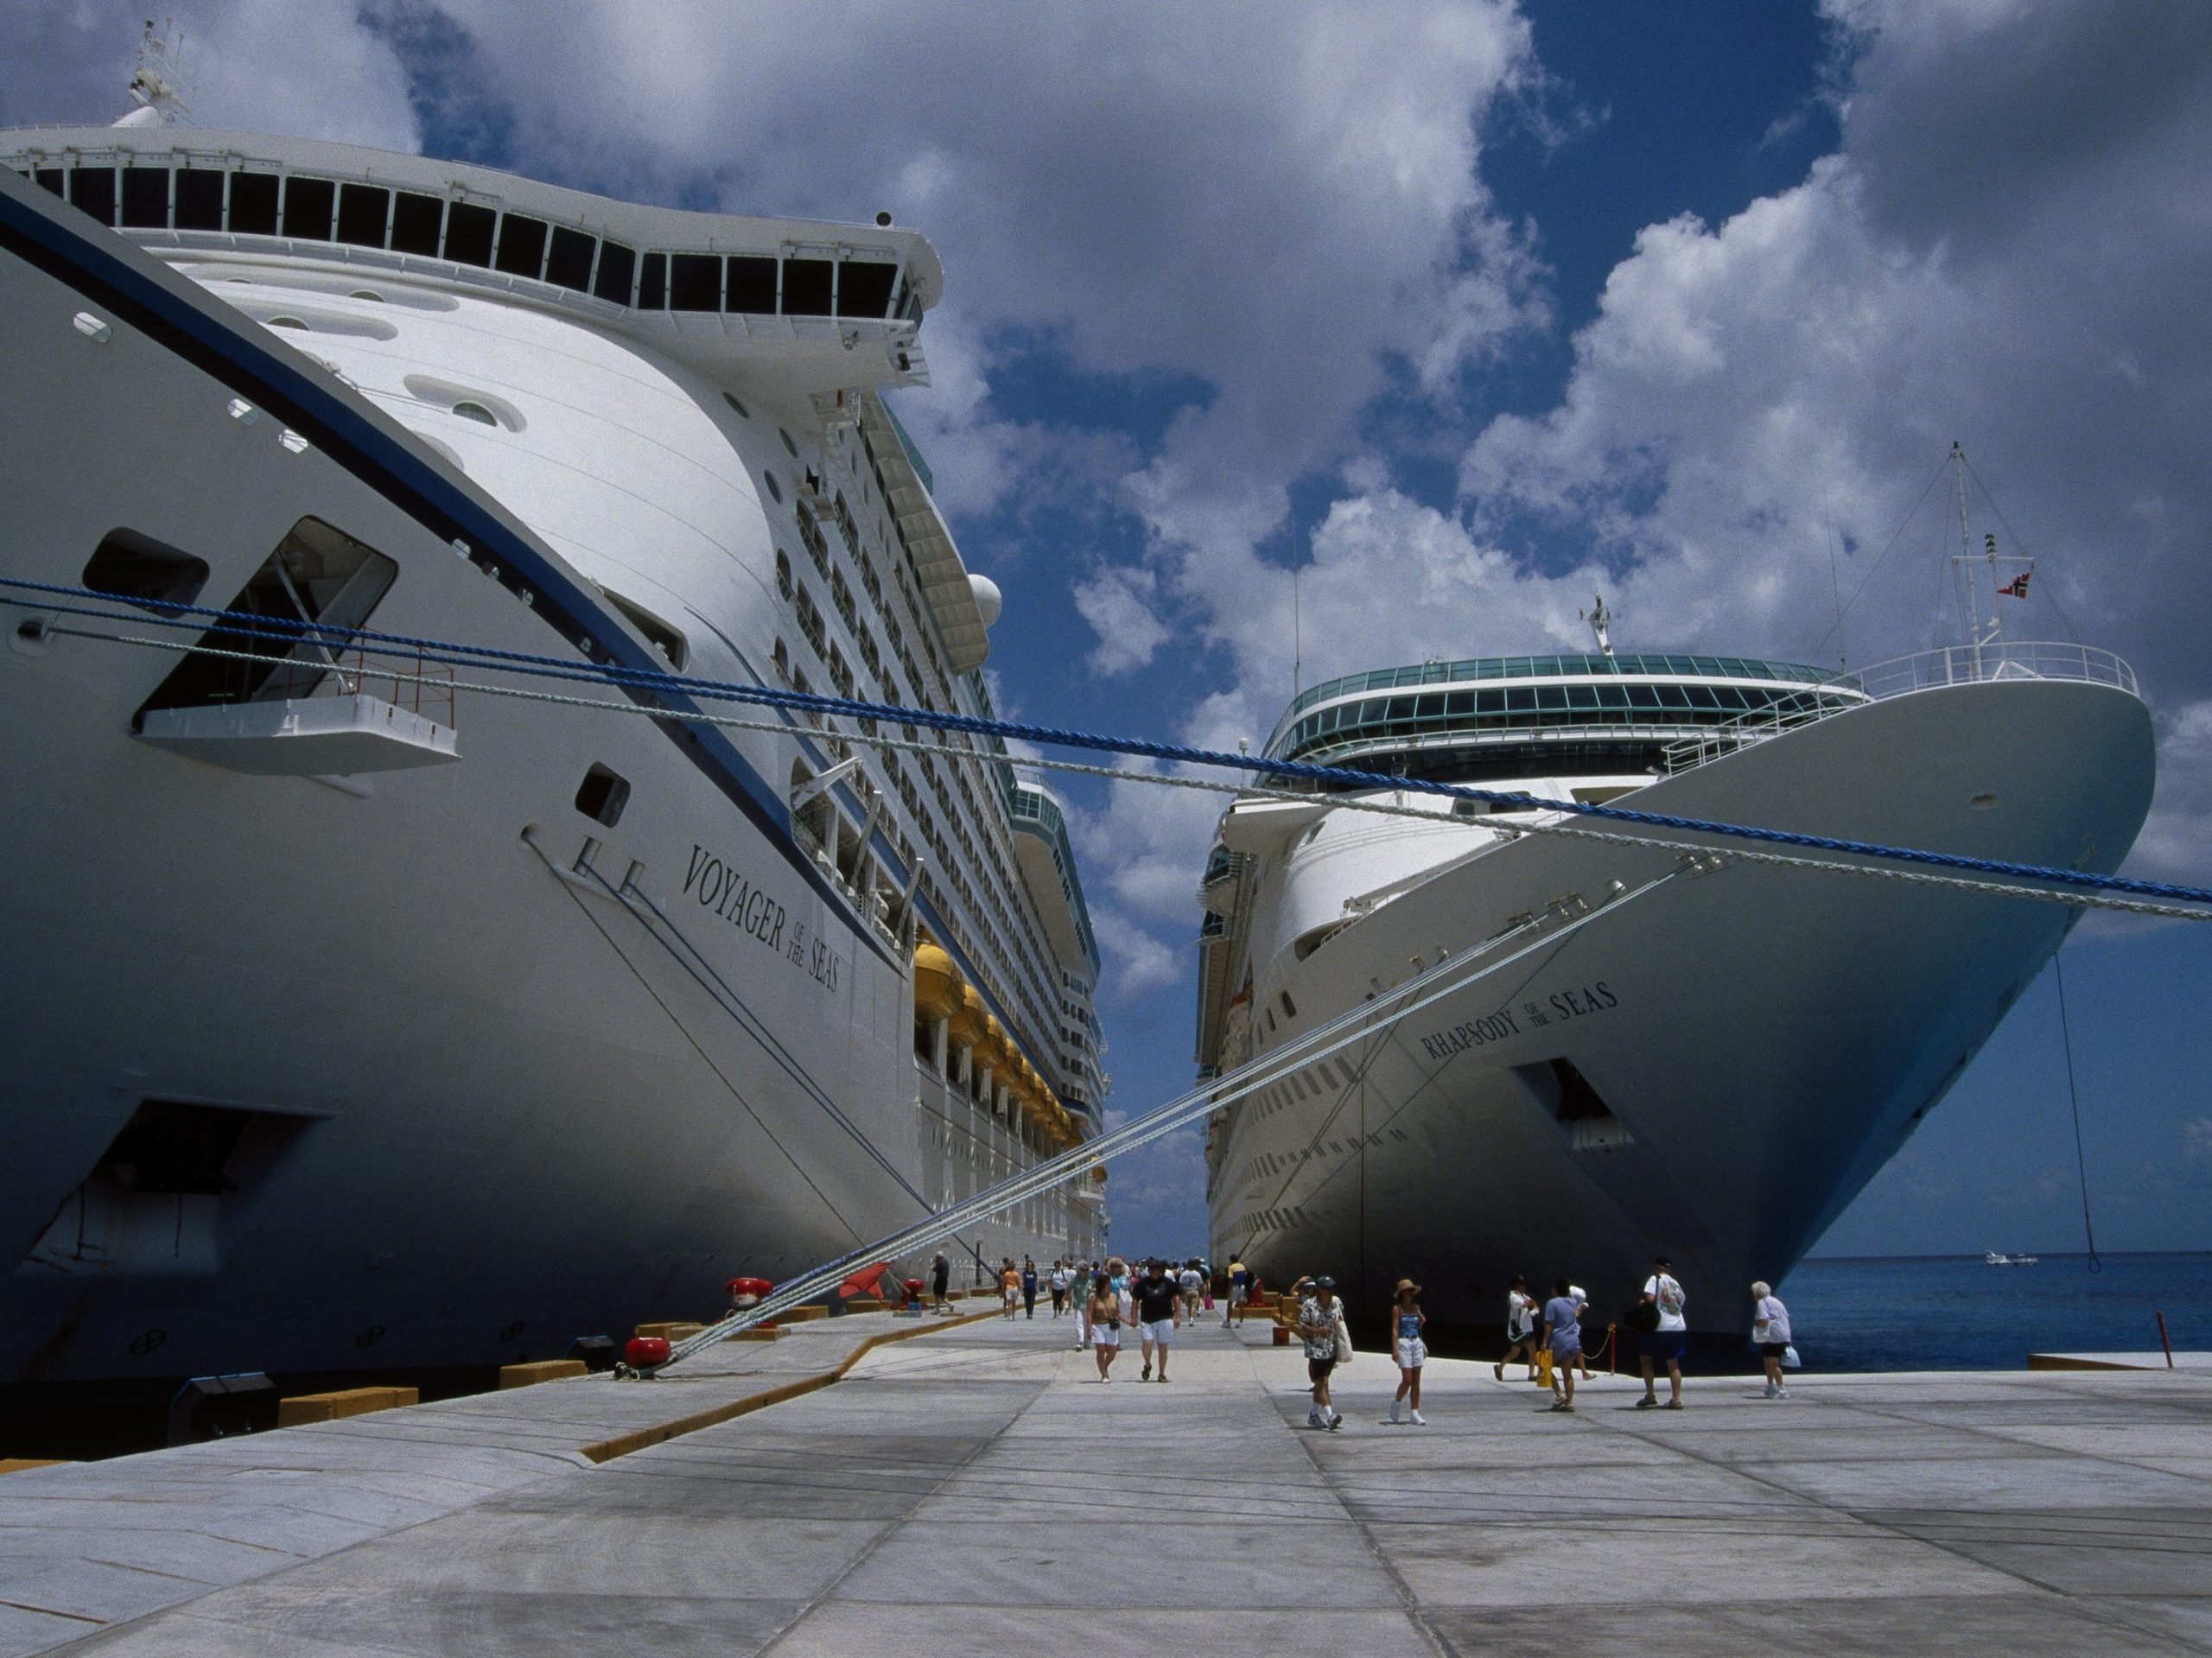 Picture of two cruise ships docking and people leaving.